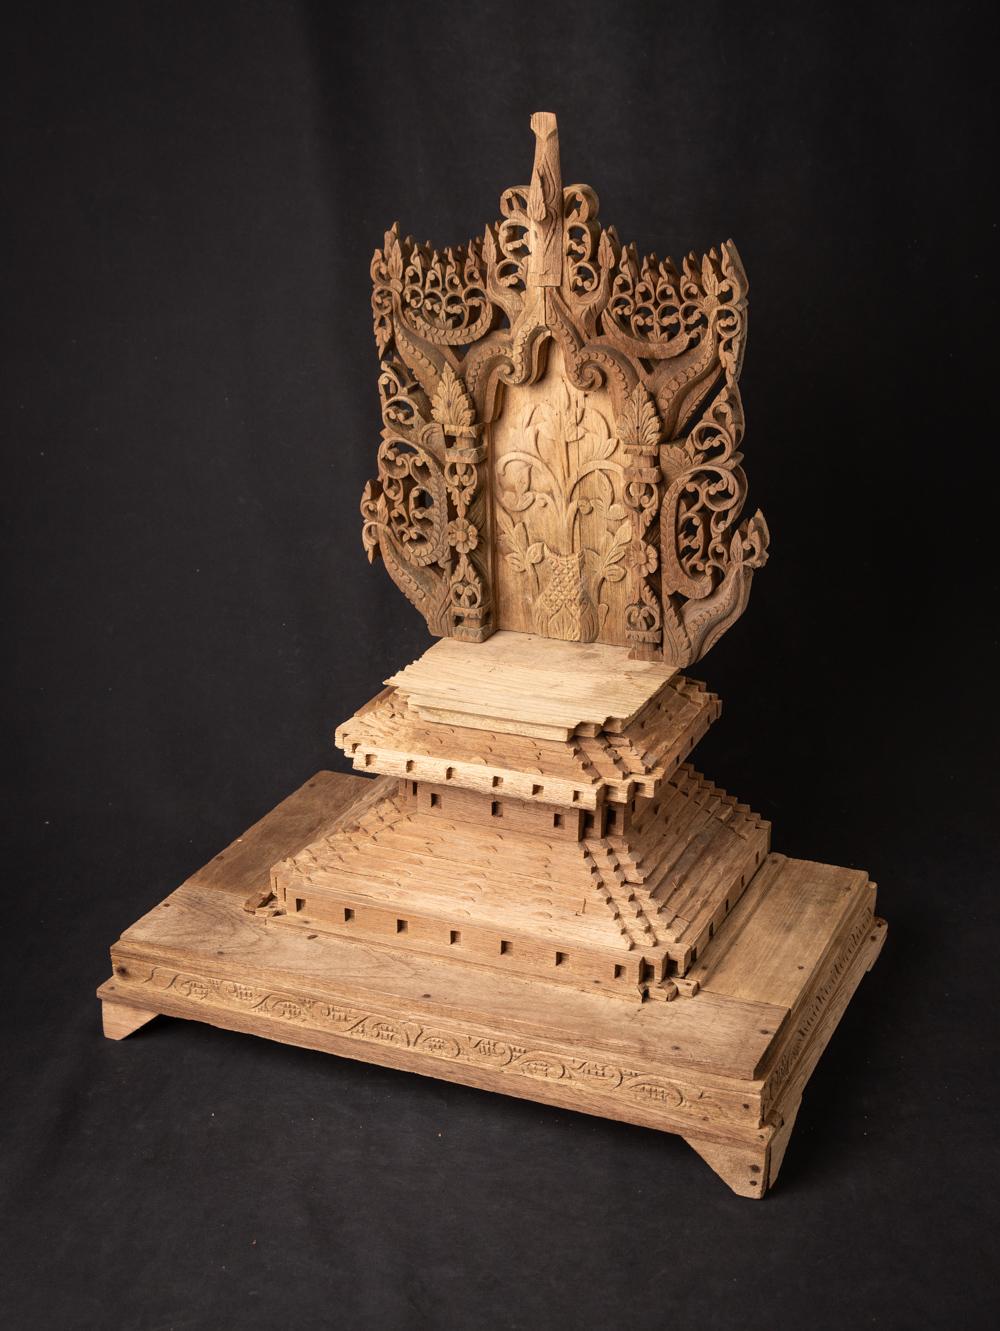 Middle 20th century Old wooden Burmese throne from Burma 2